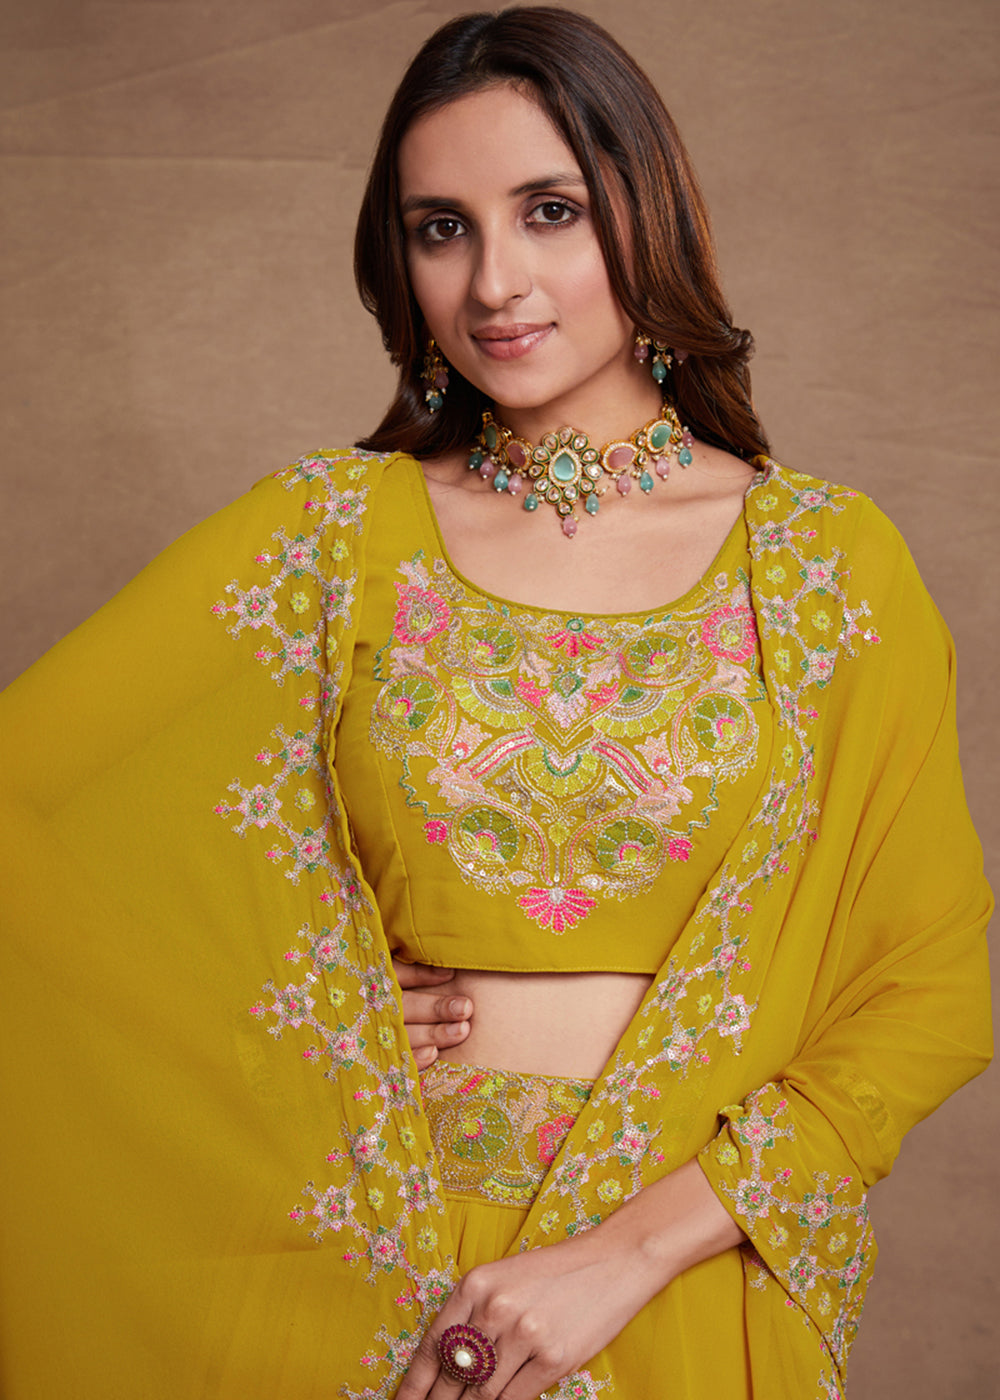 Buy Now Blooming Georgette Yellow Embroidered Festive Lehenga Choli Online in USA, UK, Canada & Worldwide at Empress Clothing.